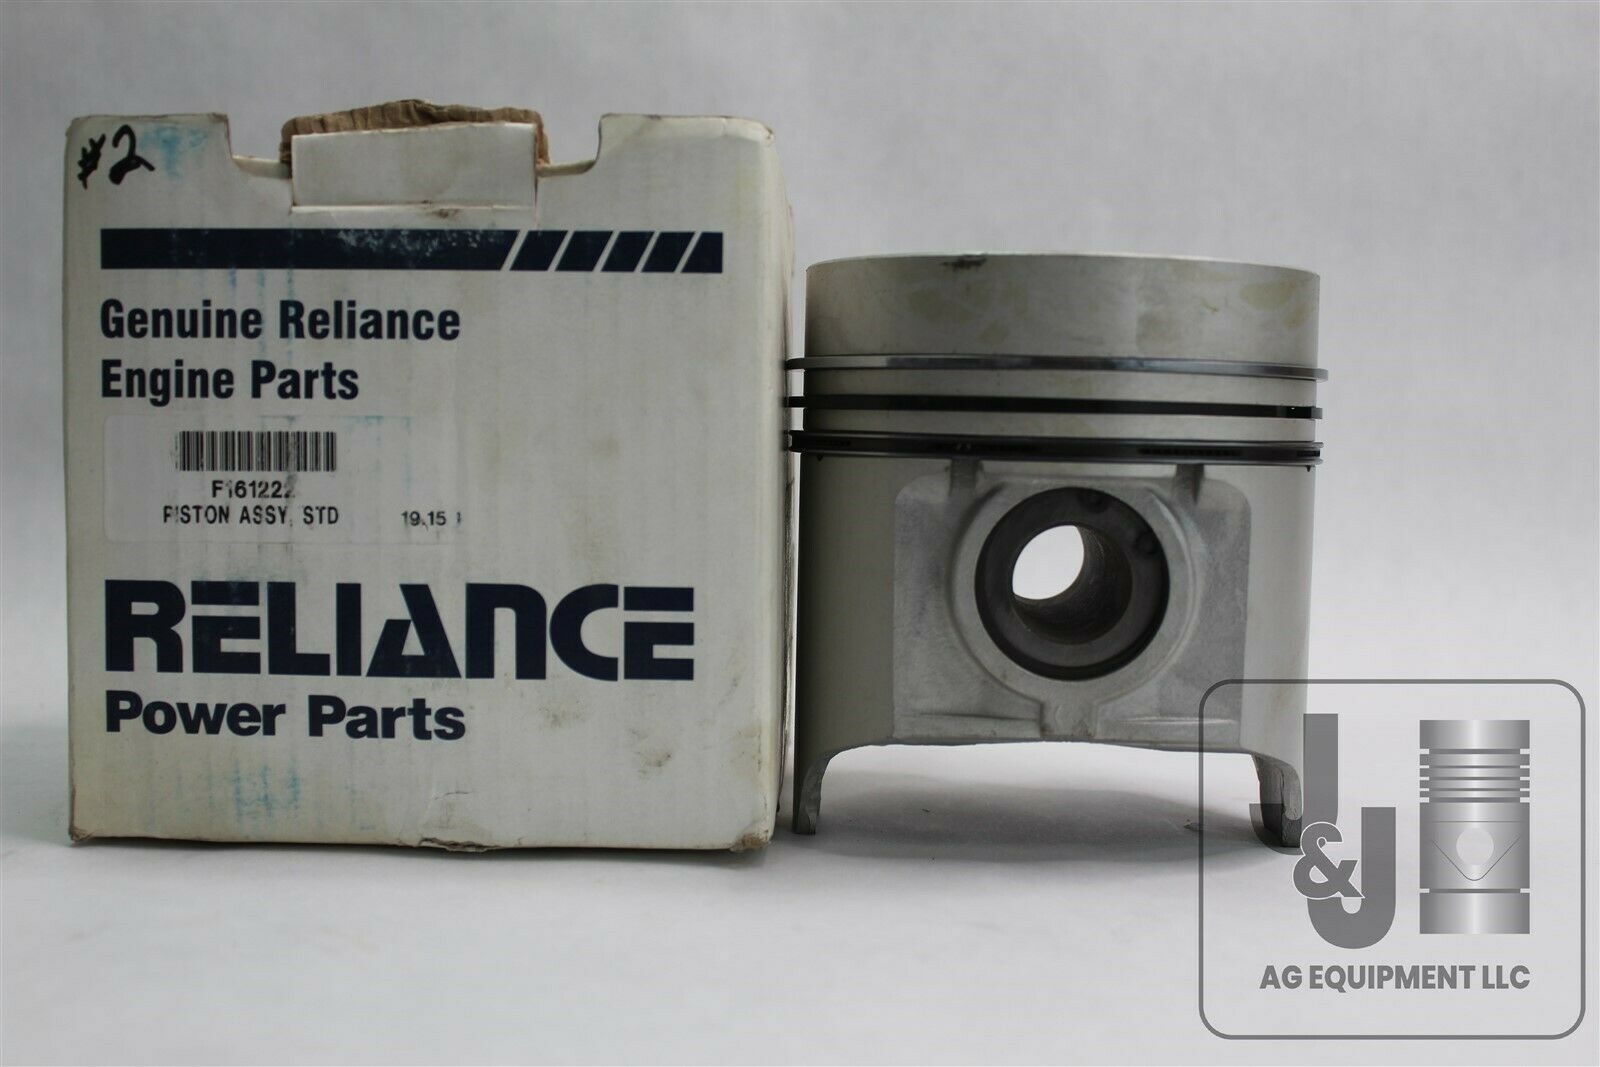 RELIANCE F161222 PISTON ASSY STD 4.401" BORE Fits Ford Tractors